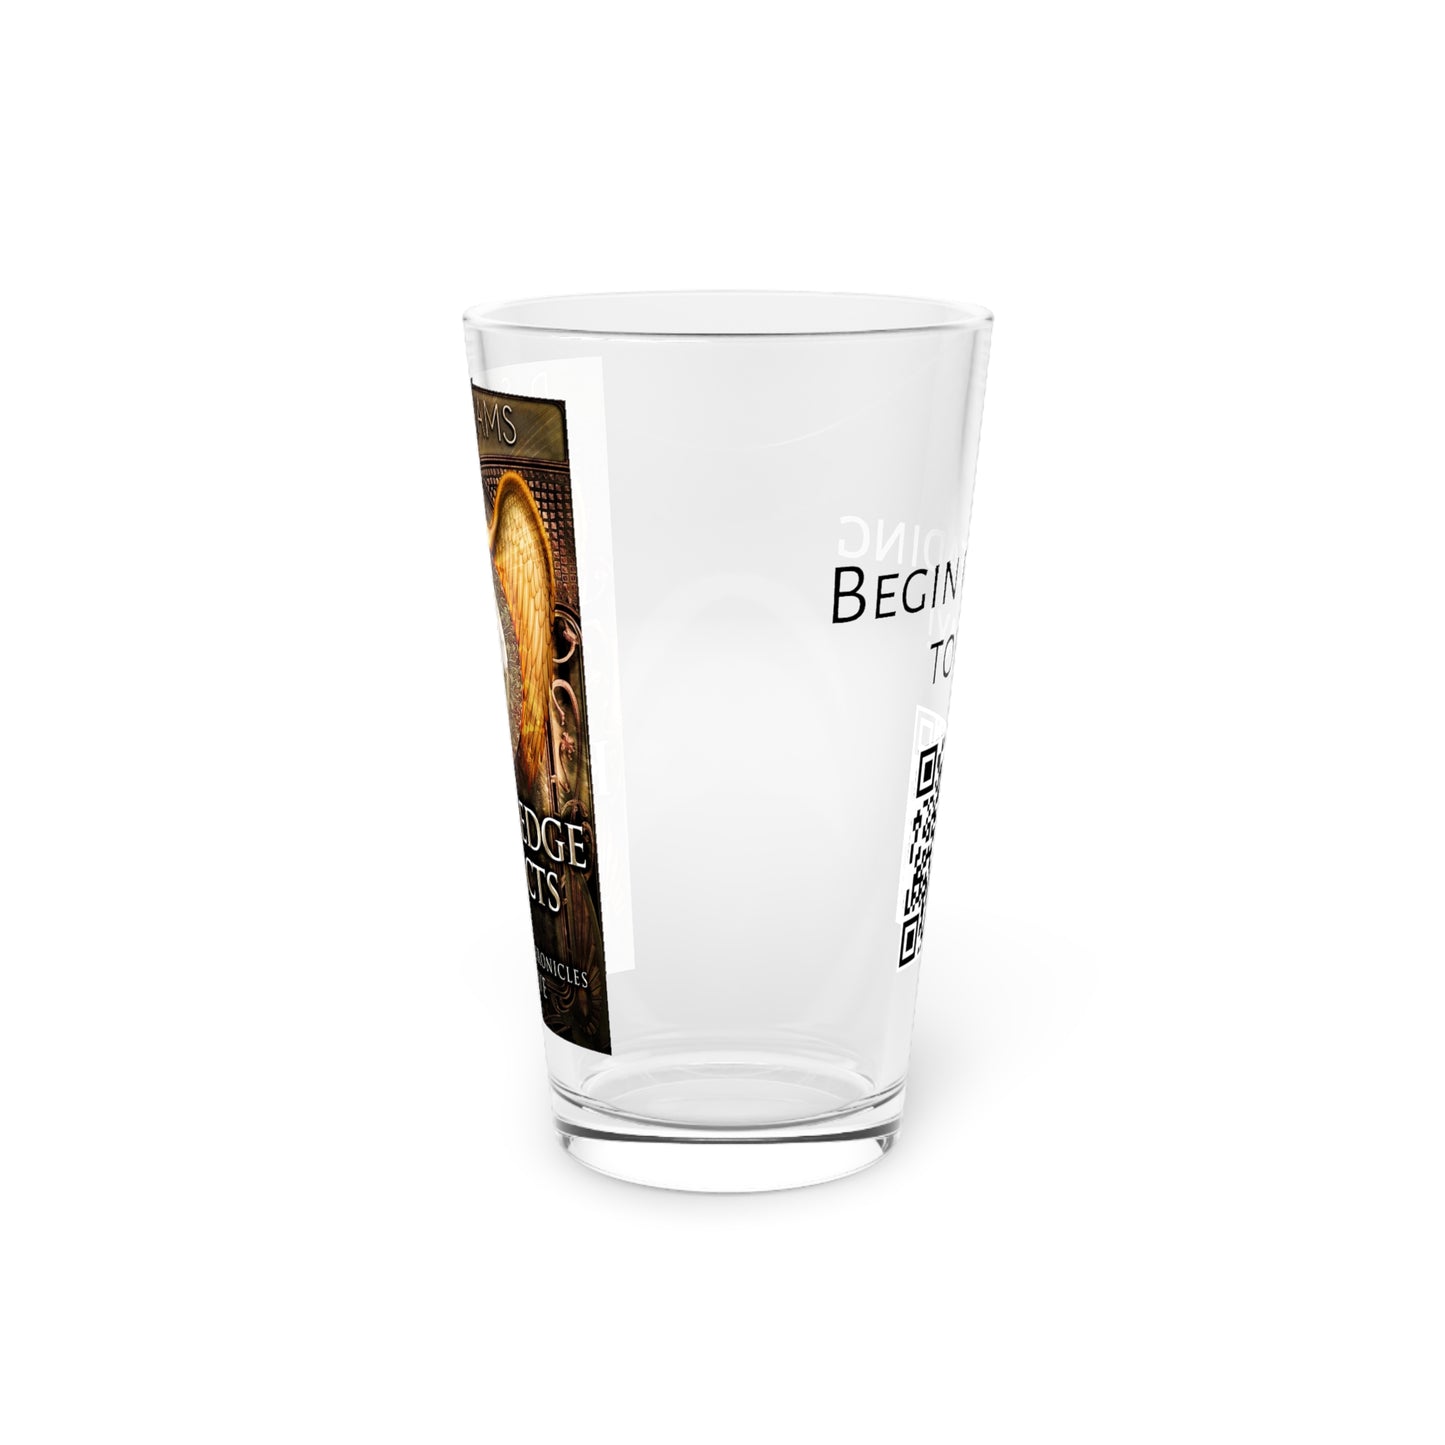 Knowledge Protects - Pint Glass